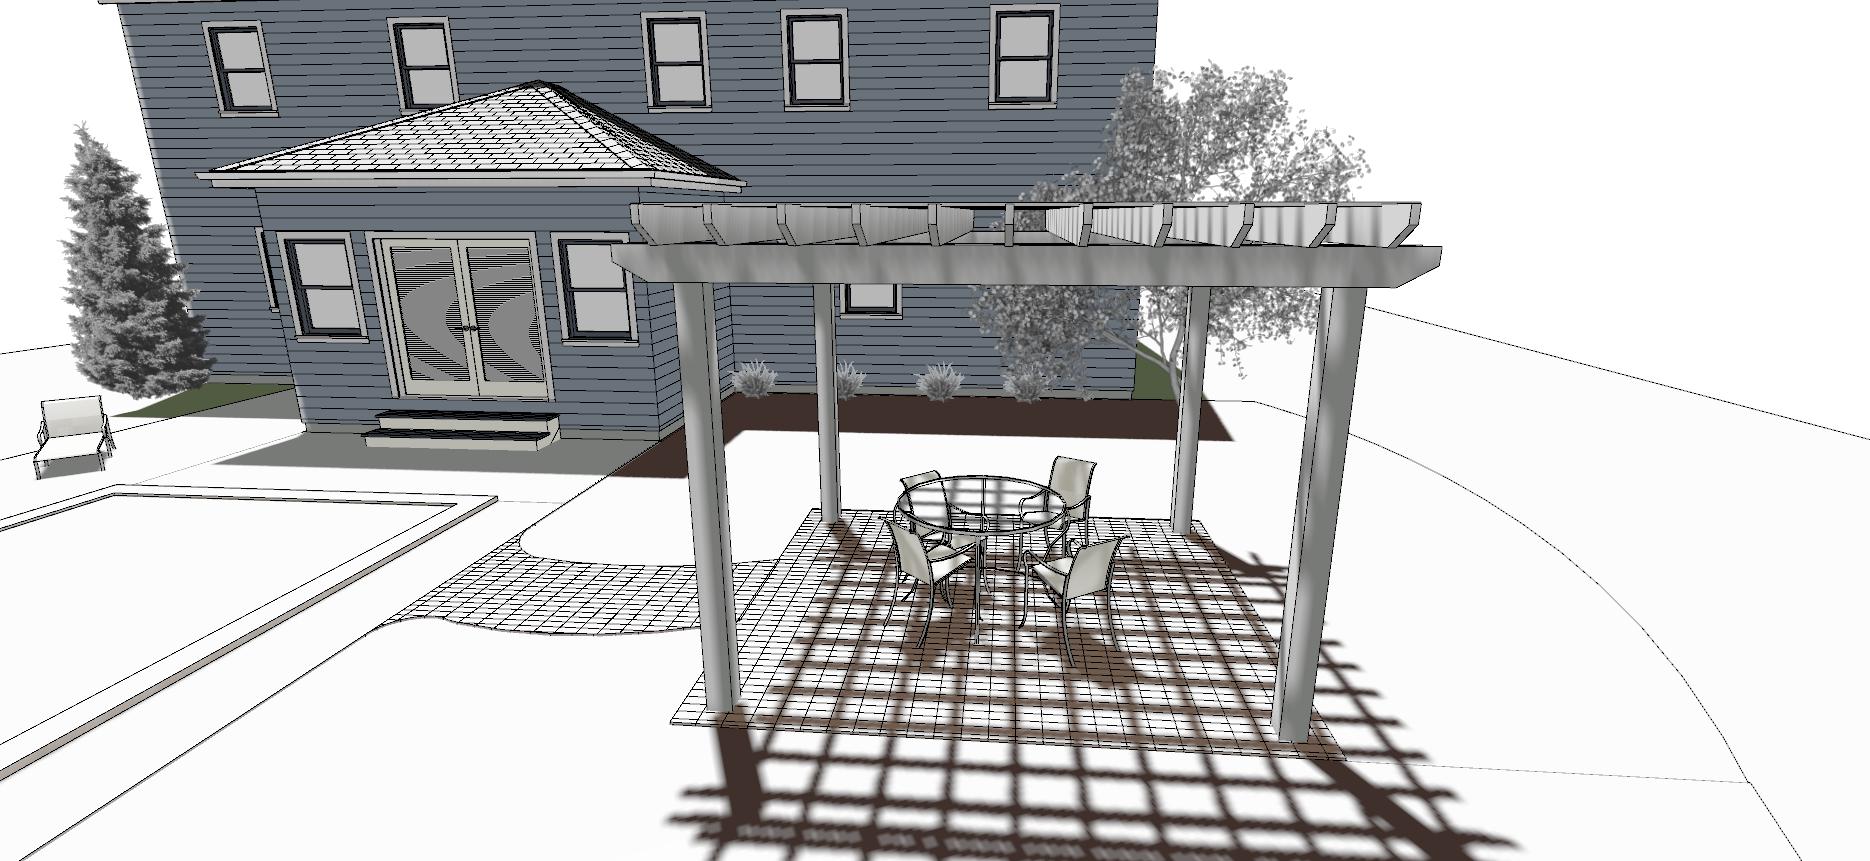 A rough sketch of what the pergola special will look like